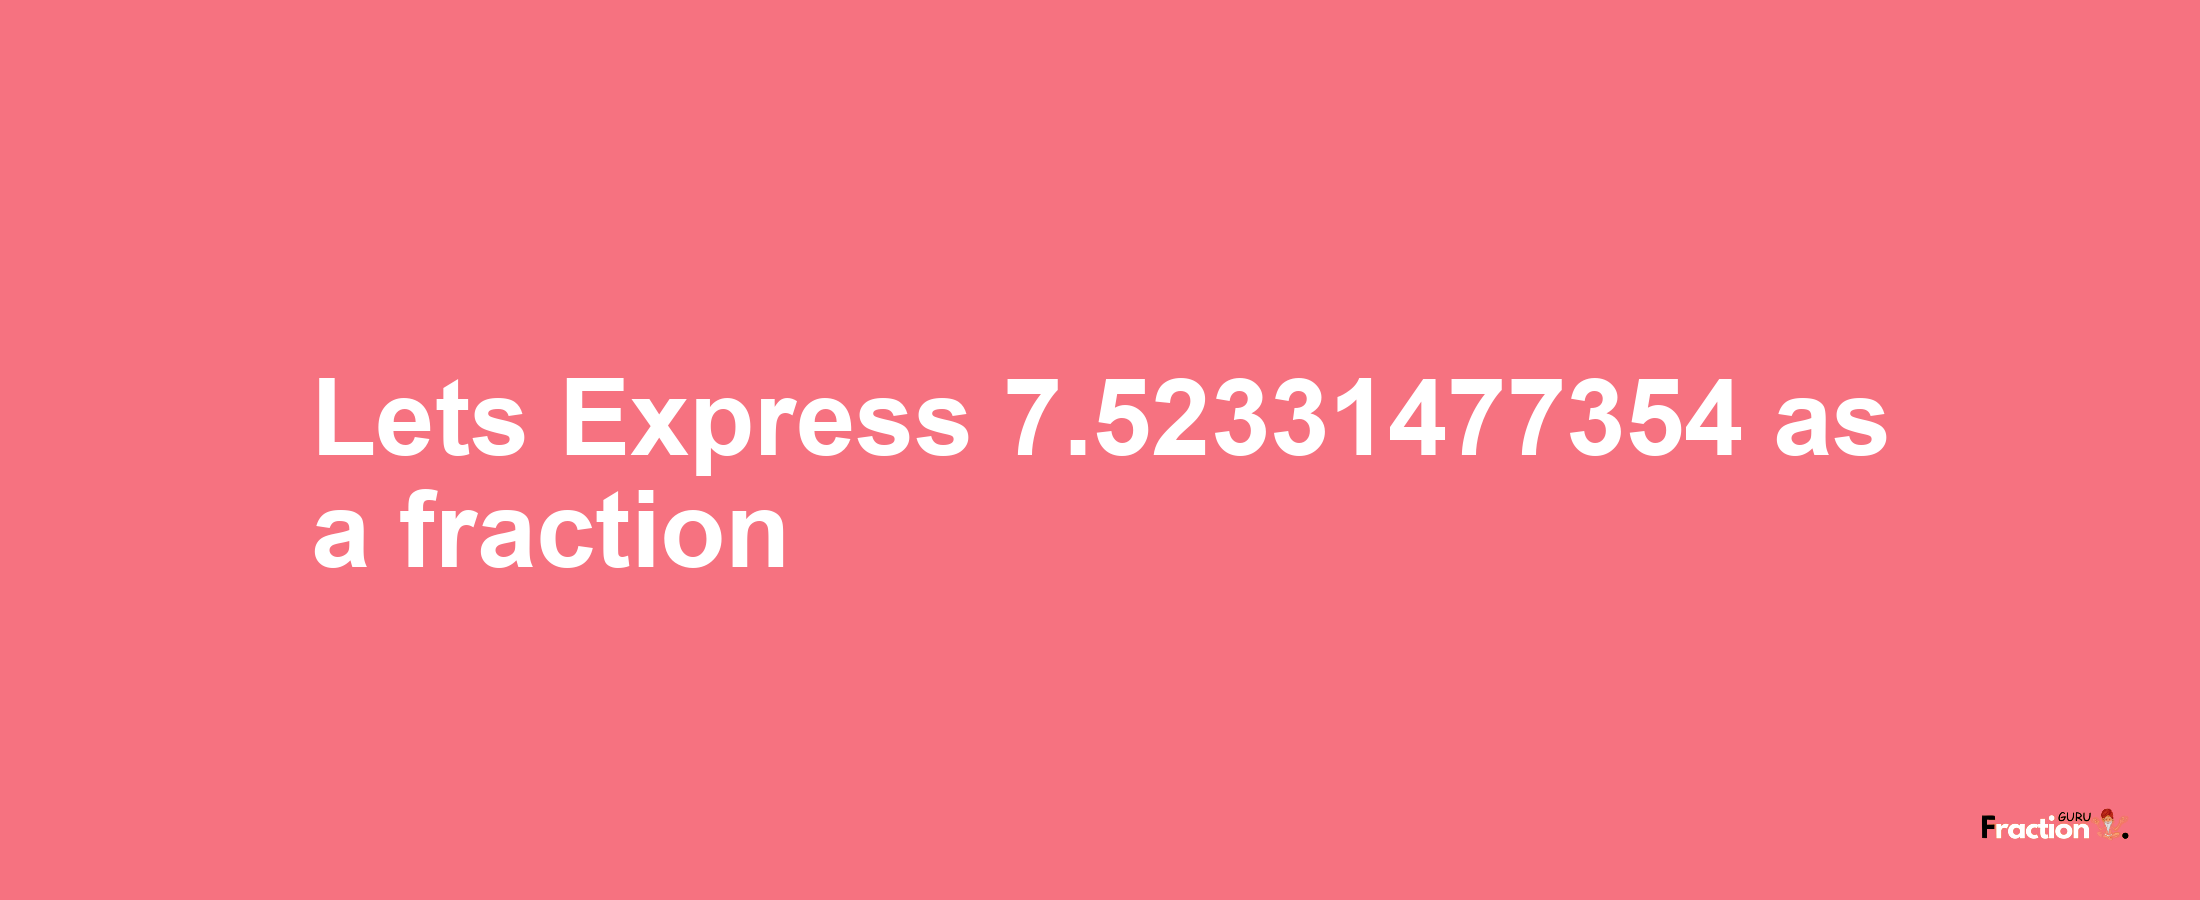 Lets Express 7.52331477354 as afraction